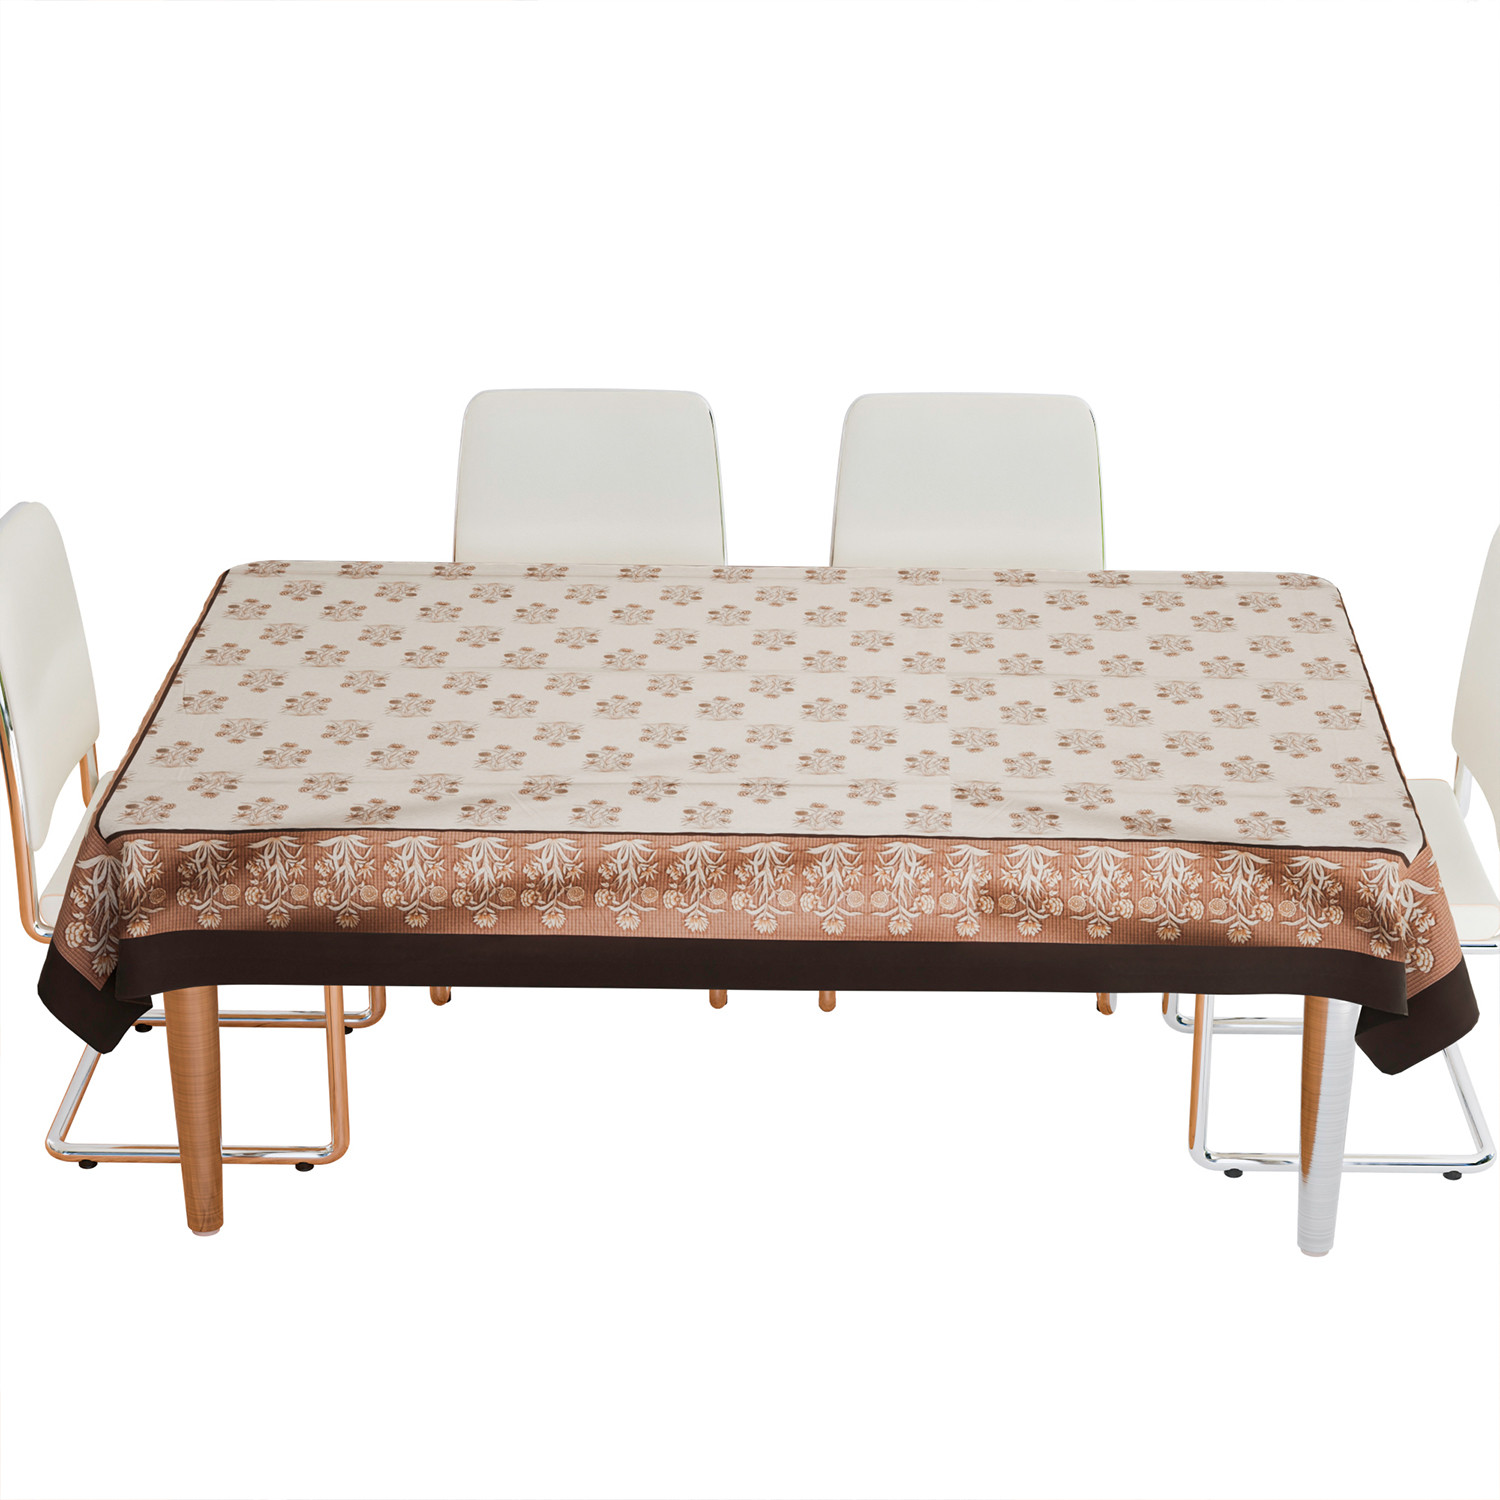 Kuber Industries Dining Table Cover | Polyester Table Cloth Cover | 6-Seater Table Cloth | Harmony Table Cover | Table Protector | Table Cover for Dining Table | 60x90 Inch | DTC | Cream & Brown